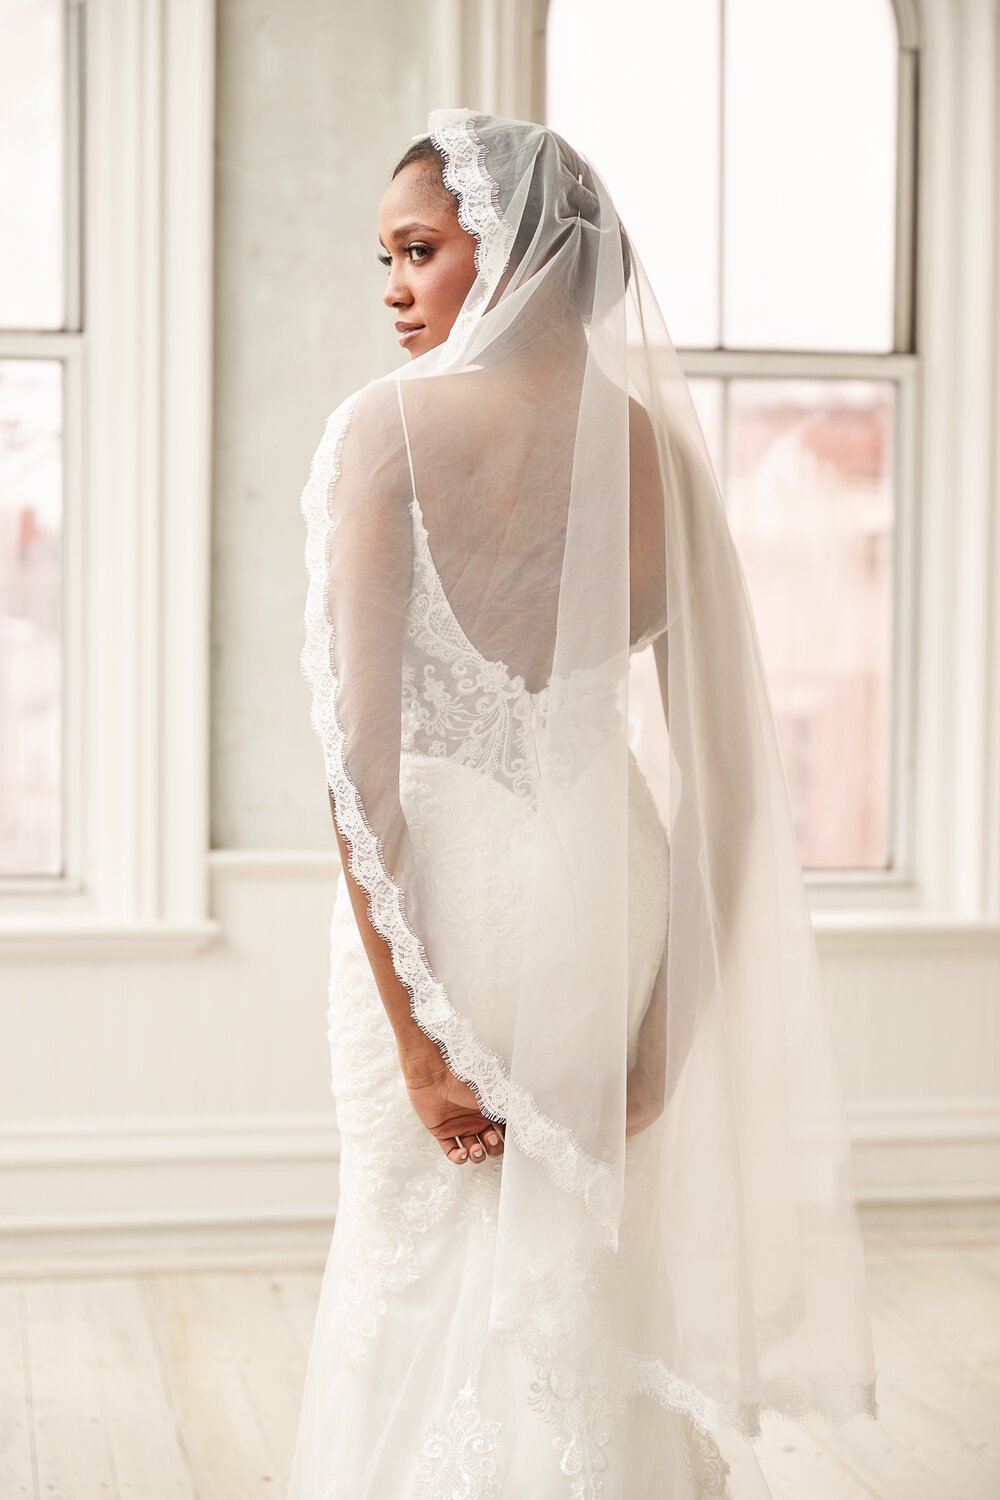 Guide to Wedding Veil Lengths